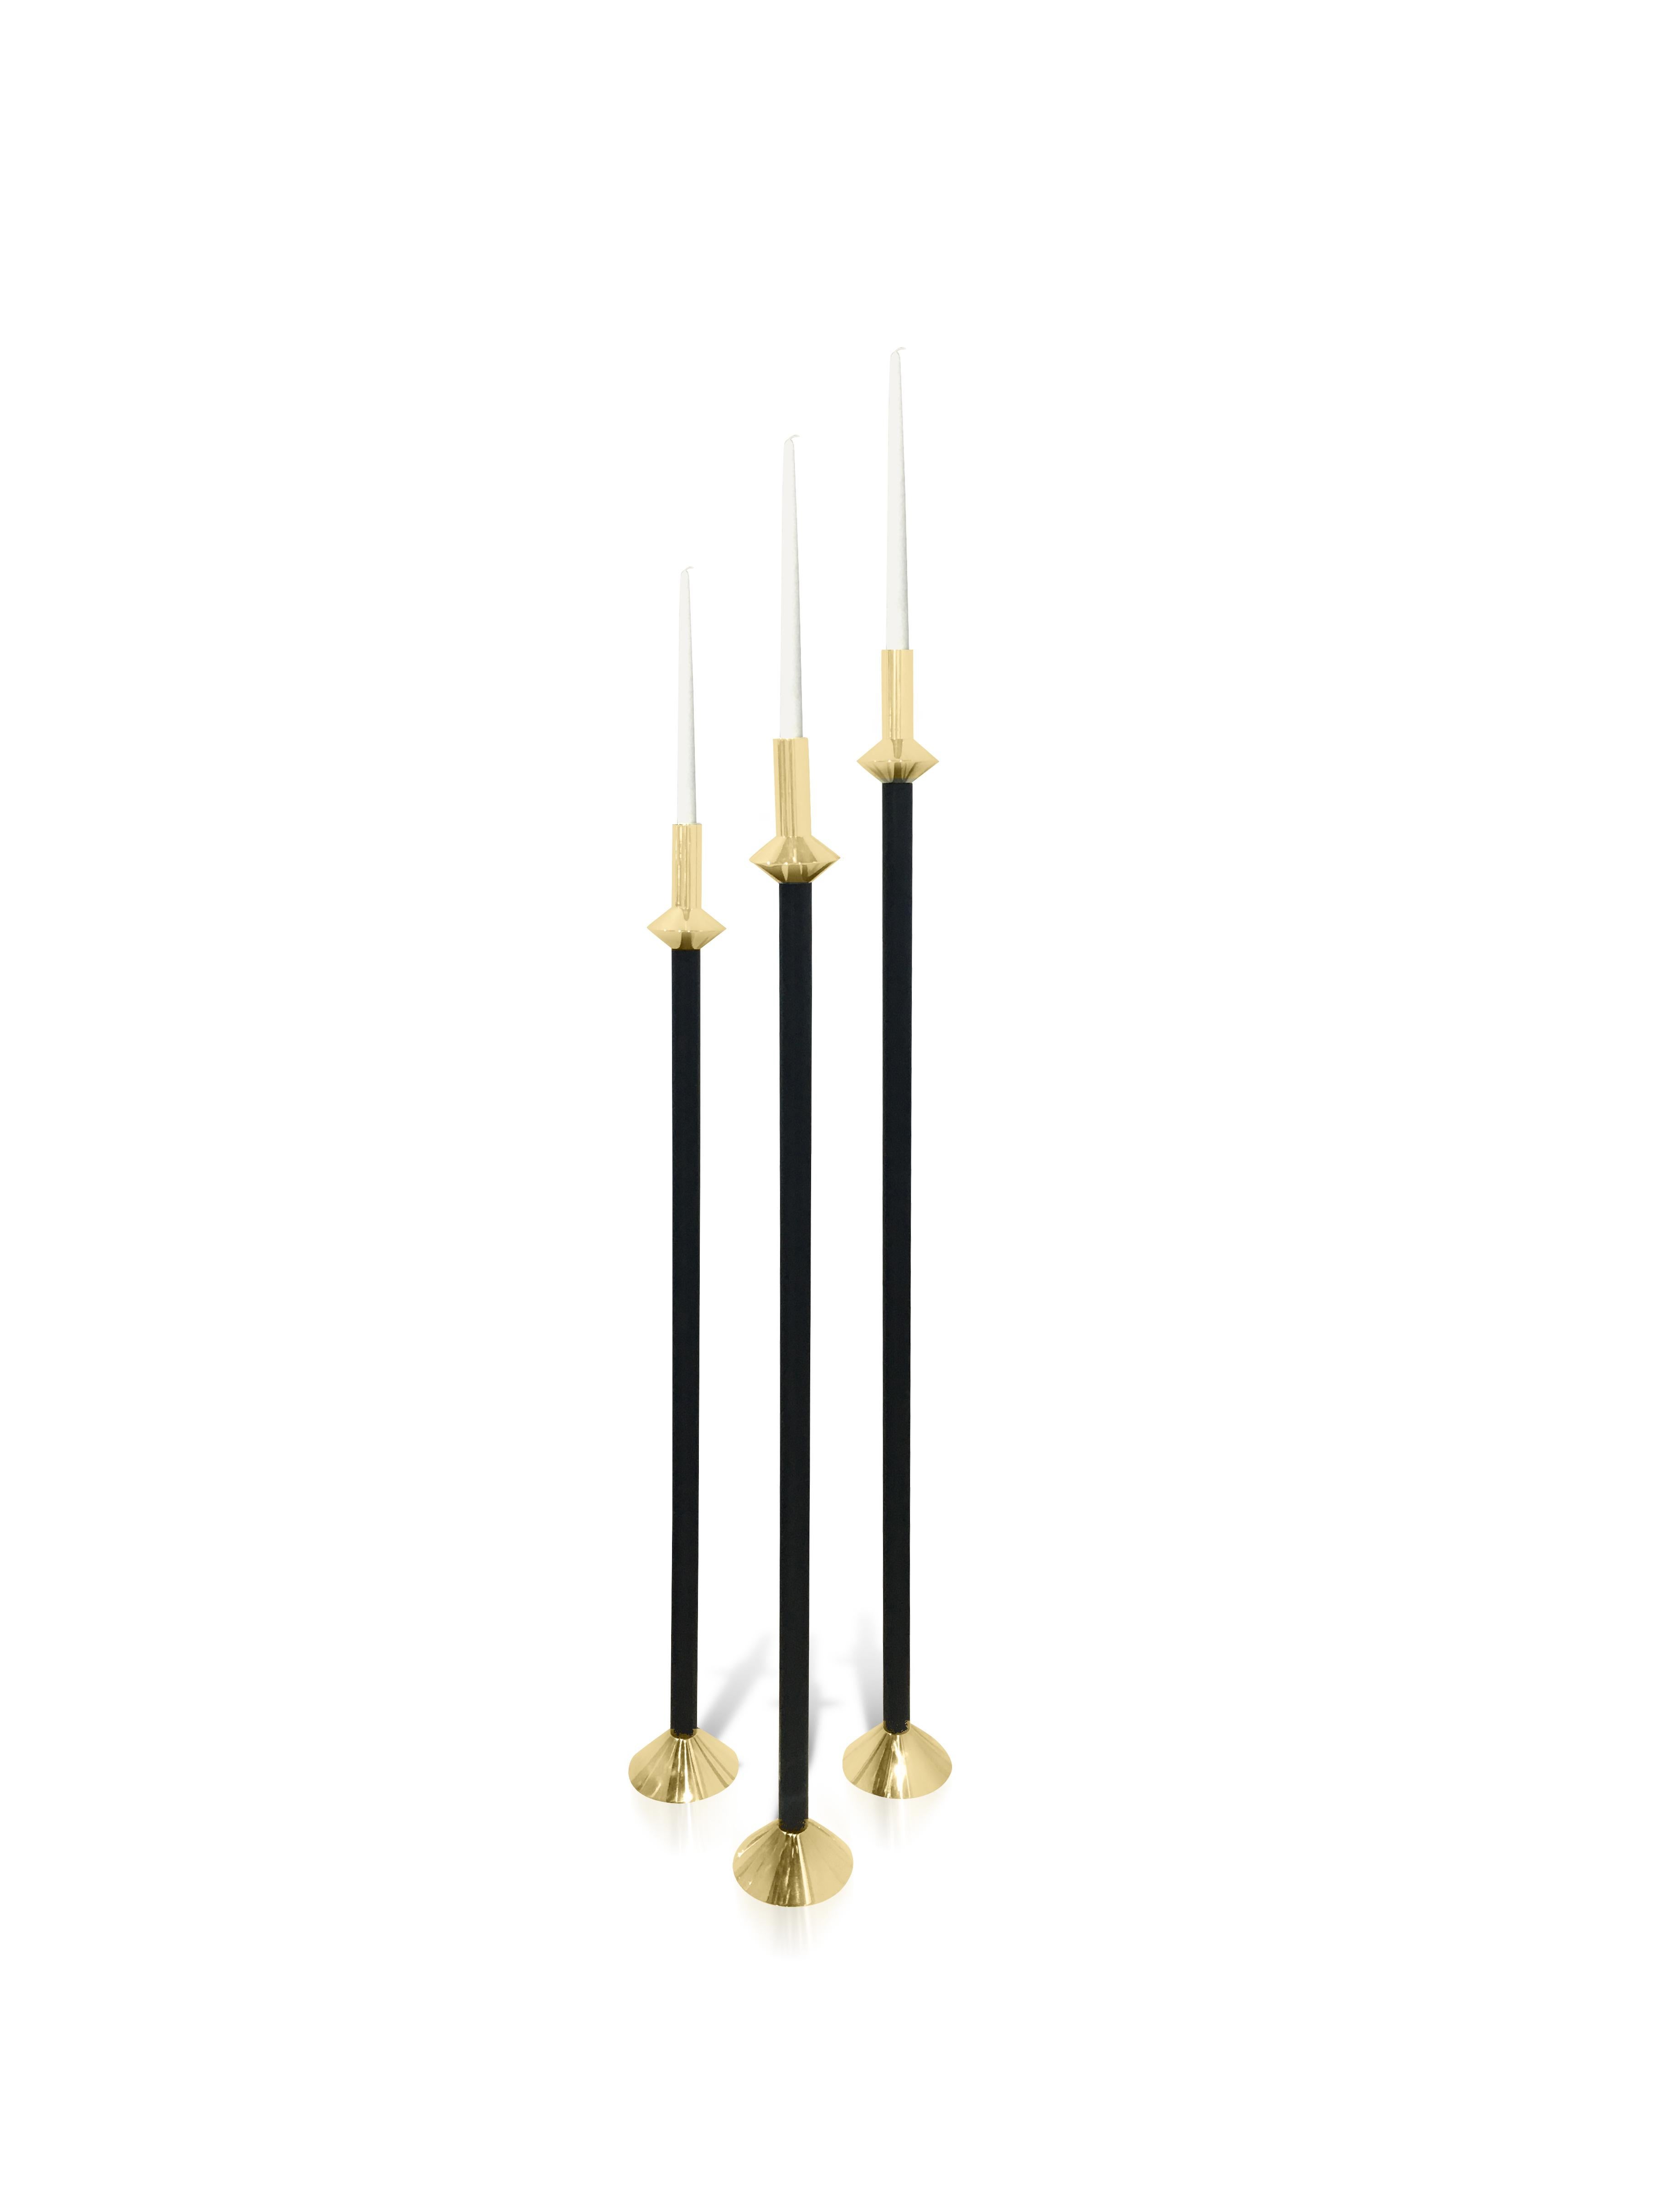 Contemporary Swedish Brass and Leather Modern Minimalist Candleholders, Large In New Condition For Sale In New York, NY